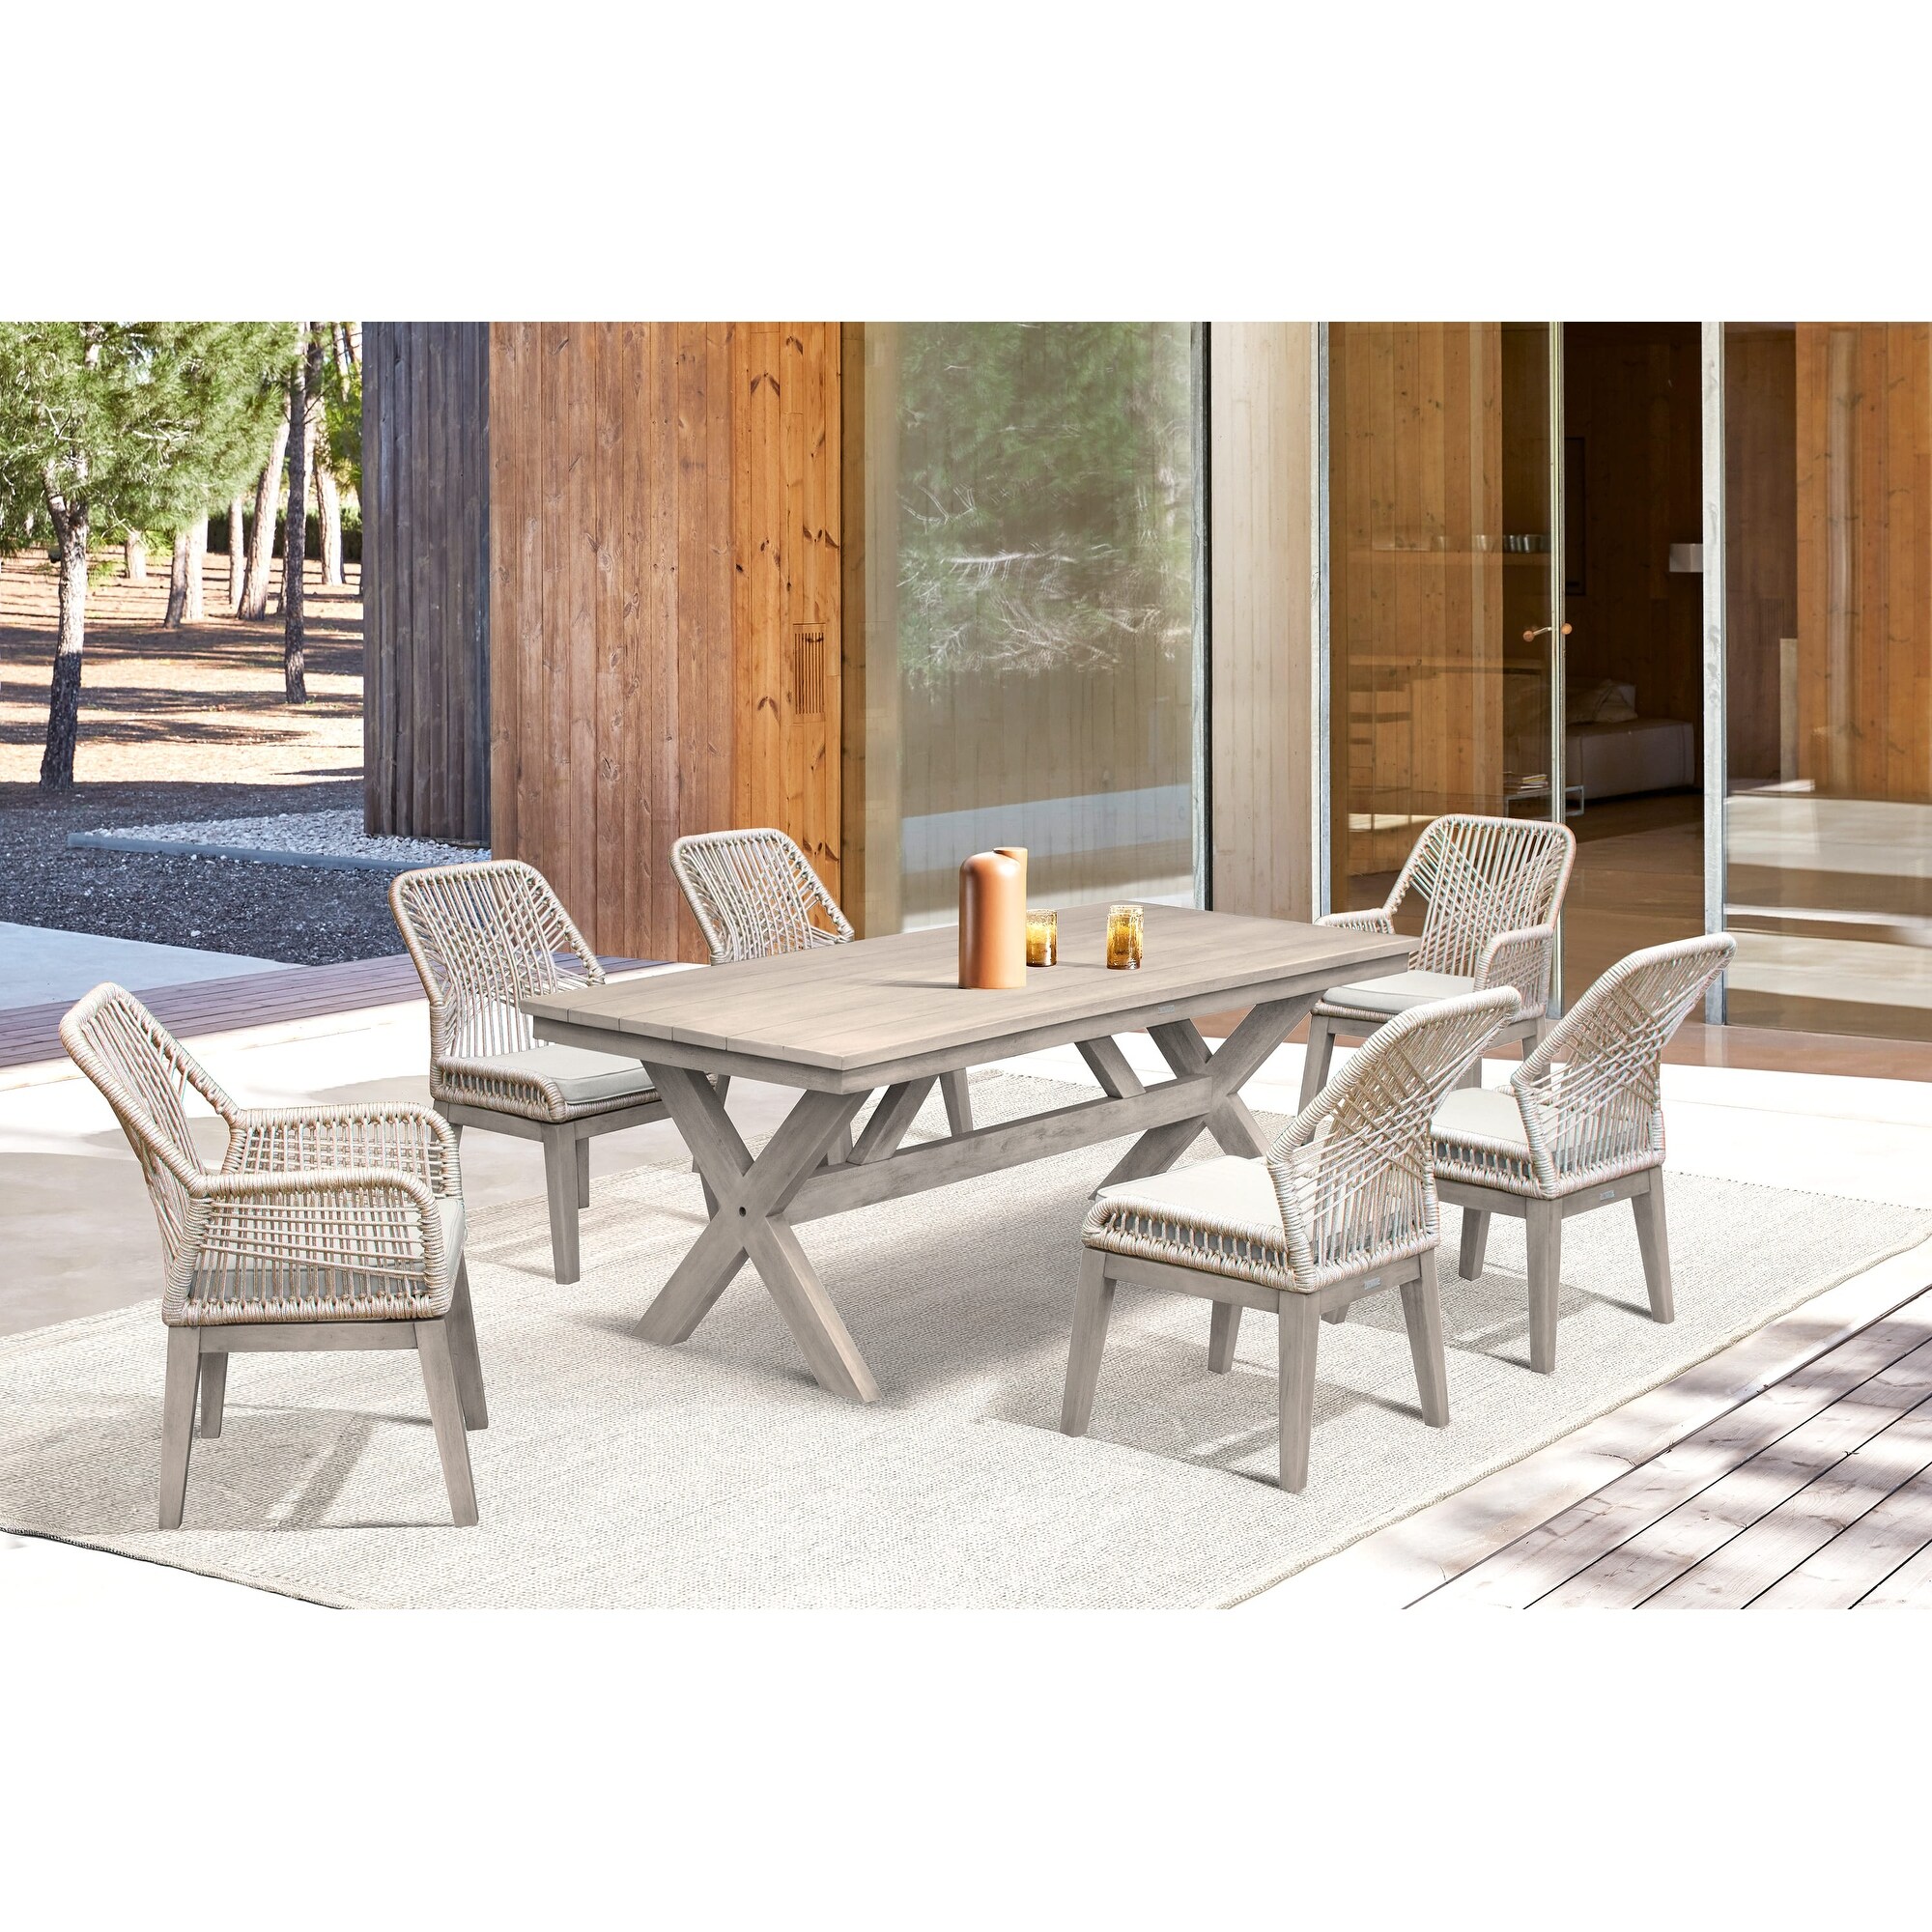 Costa 7 Piece Patio Outdoor Dining Set In Grey Acacia Wood And Rope